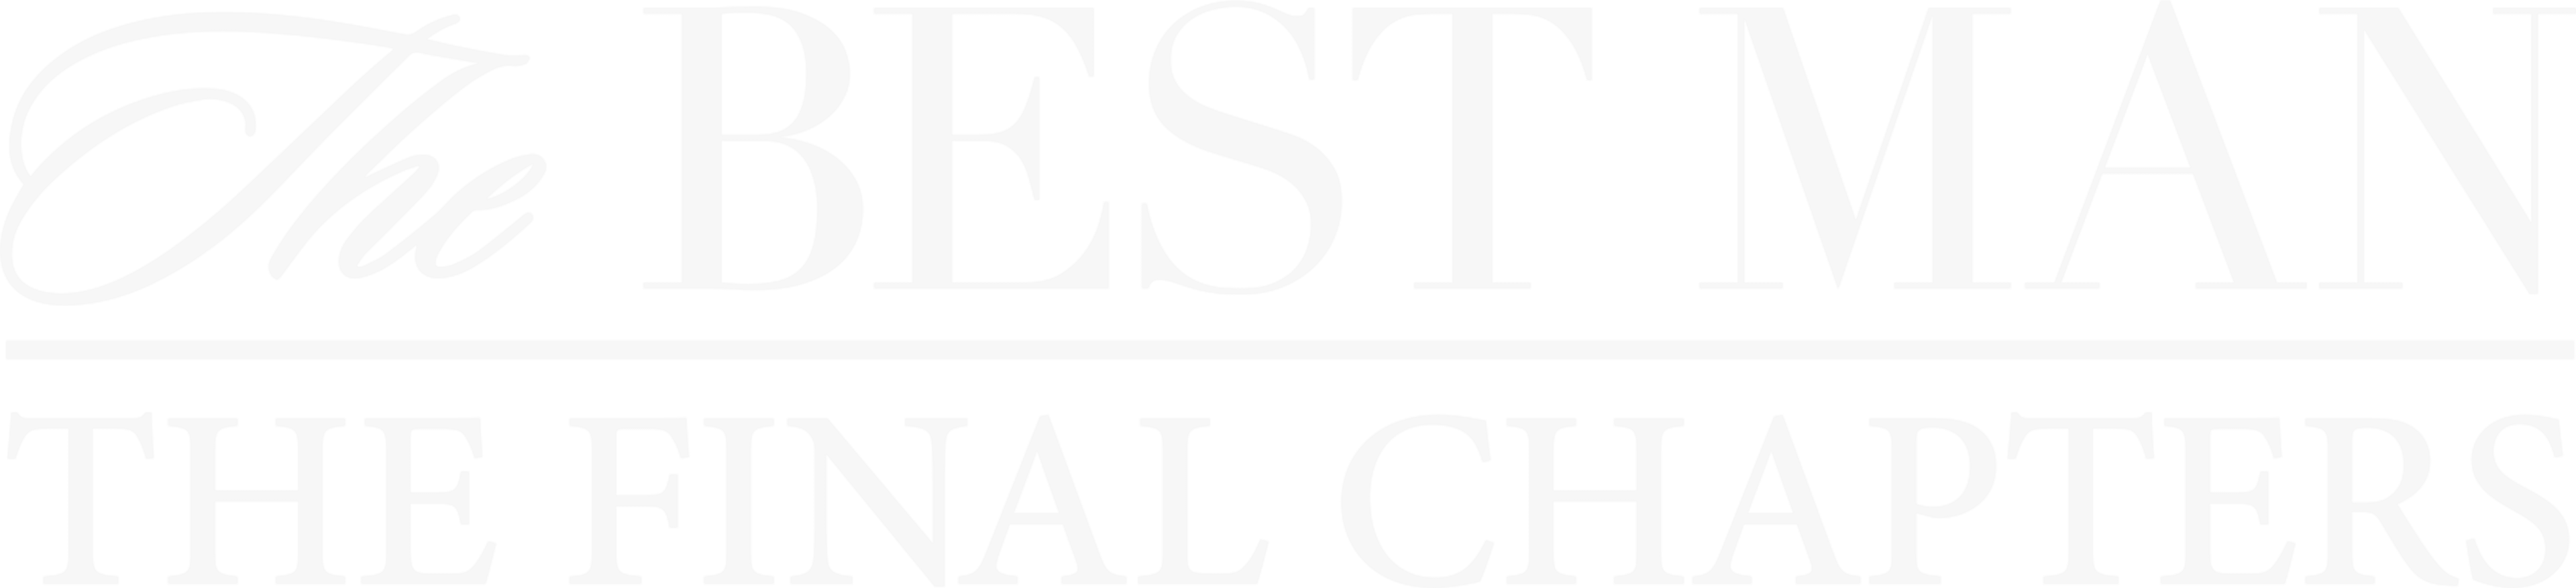 The Best Man: The Final Chapters logo